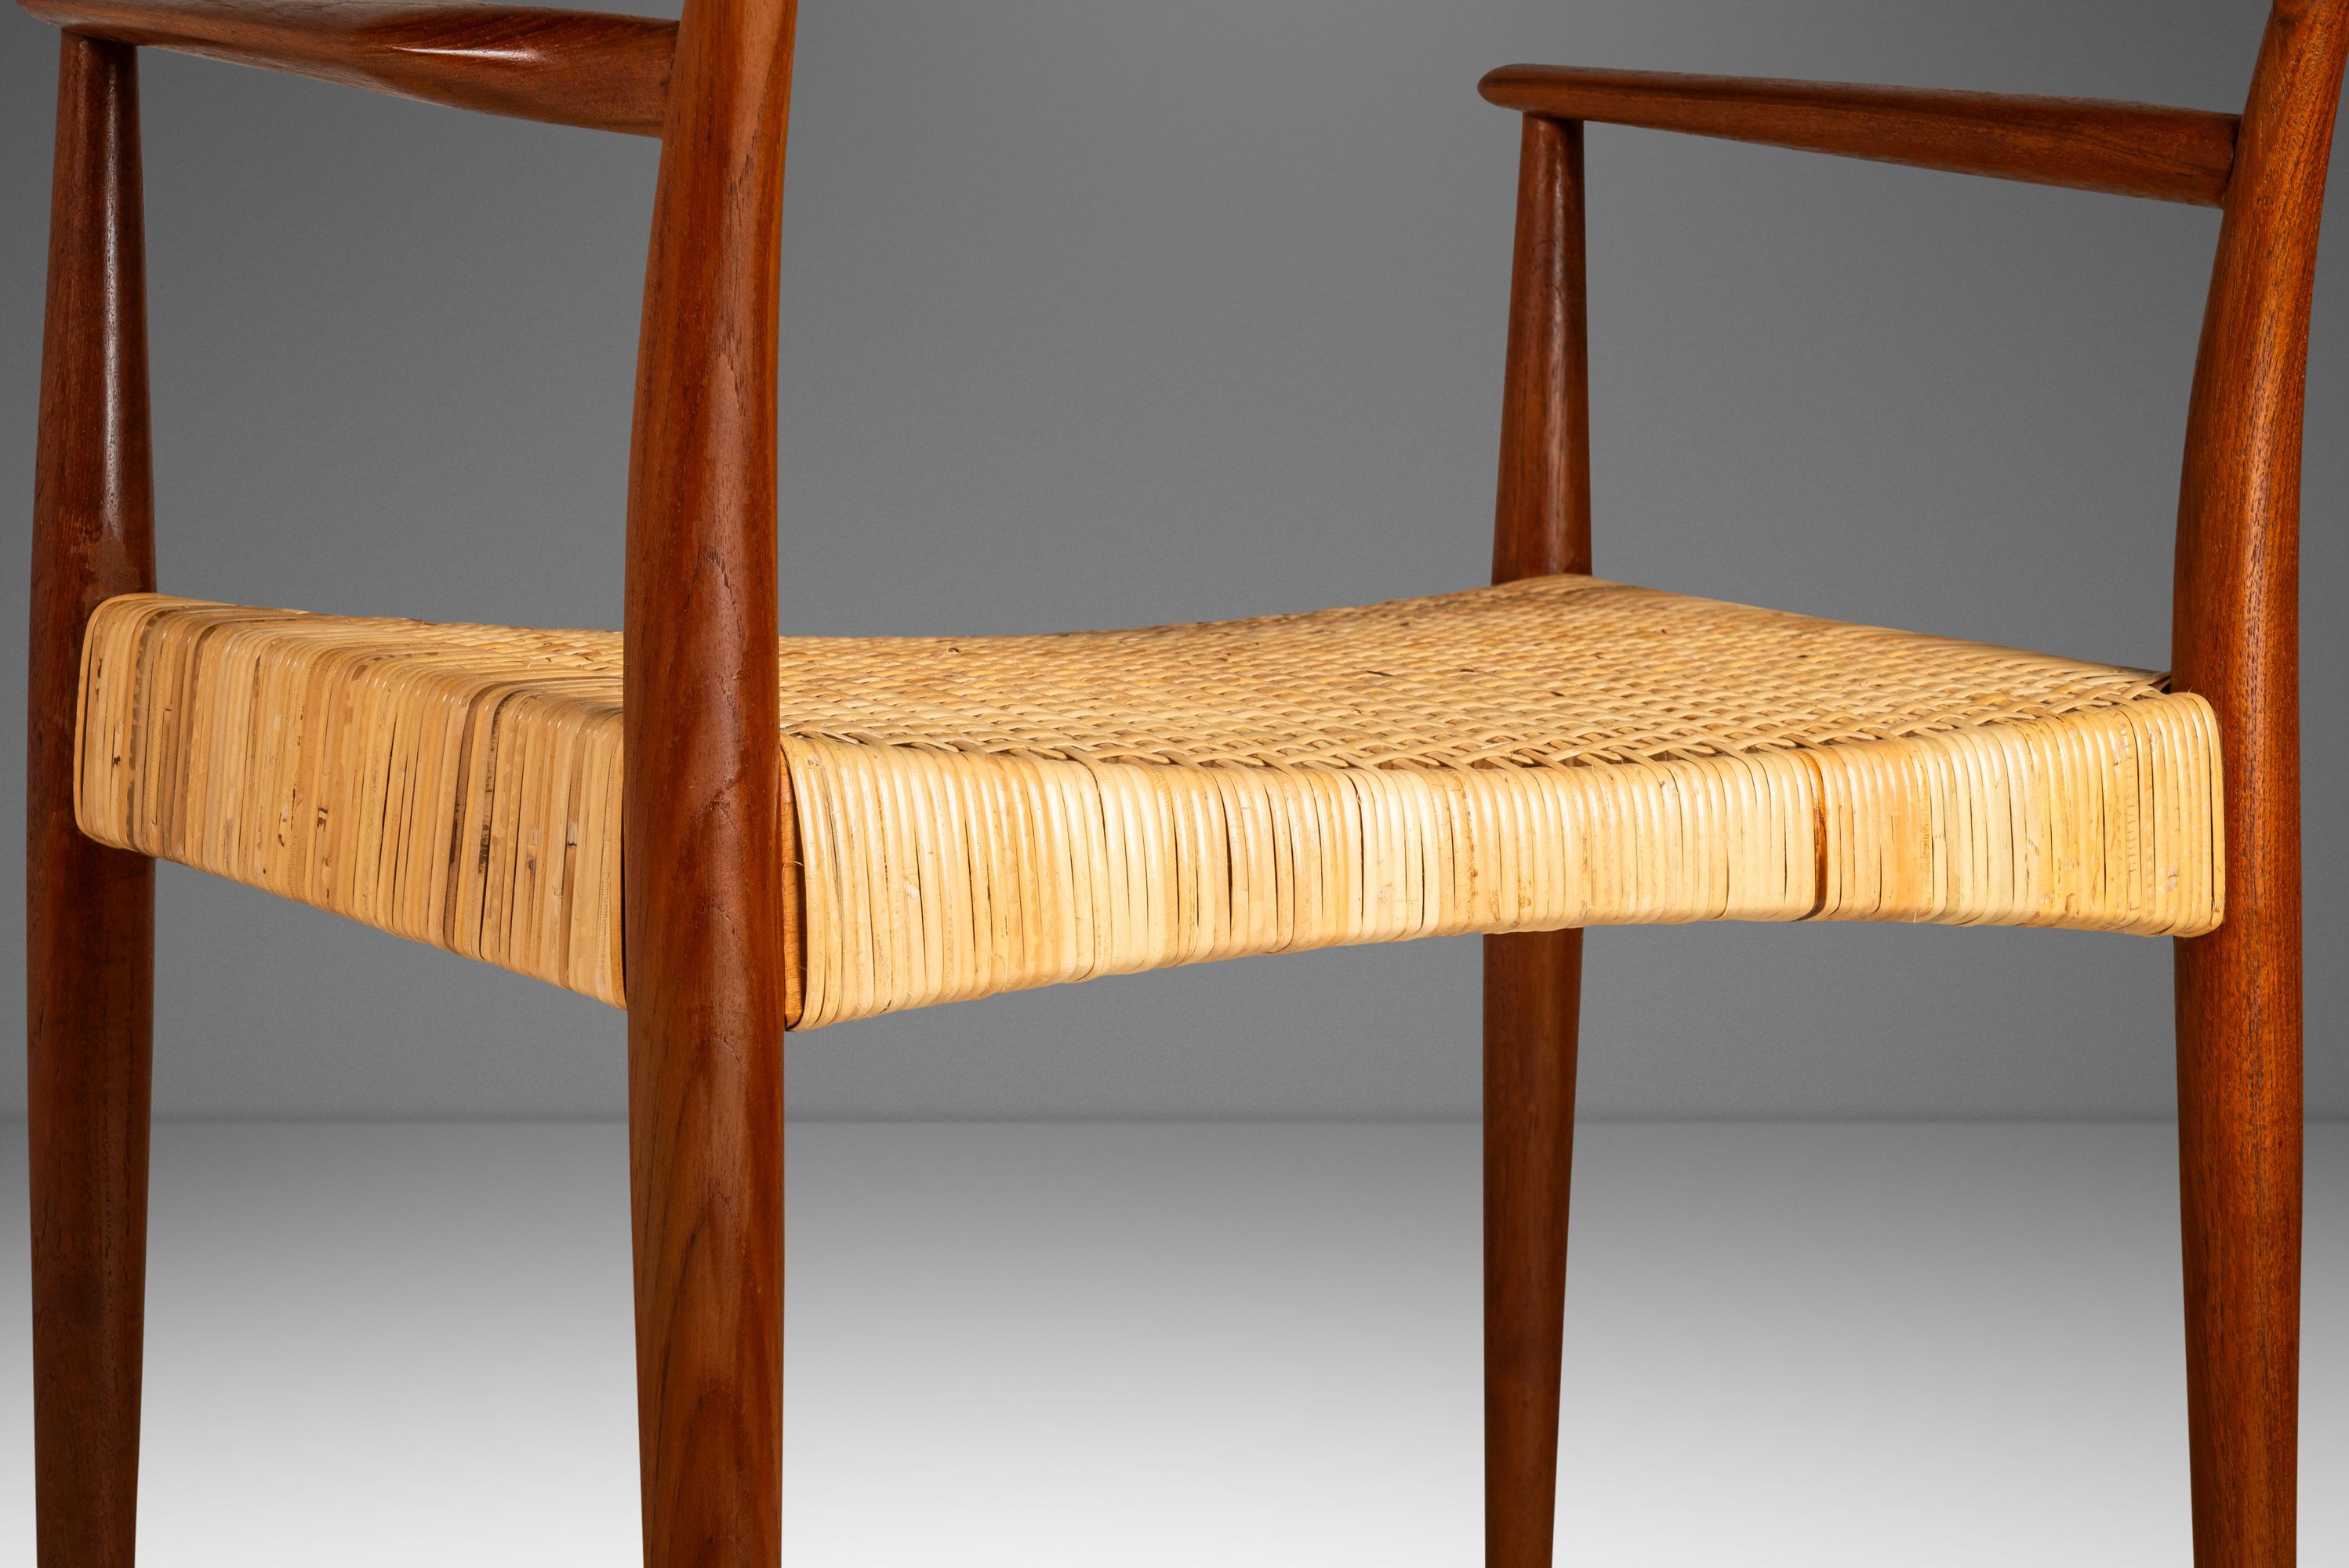 Set of 2 Danish Modern Arm Chairs by Enjar Larsen & Bender Madsen for Willy Beck For Sale 1